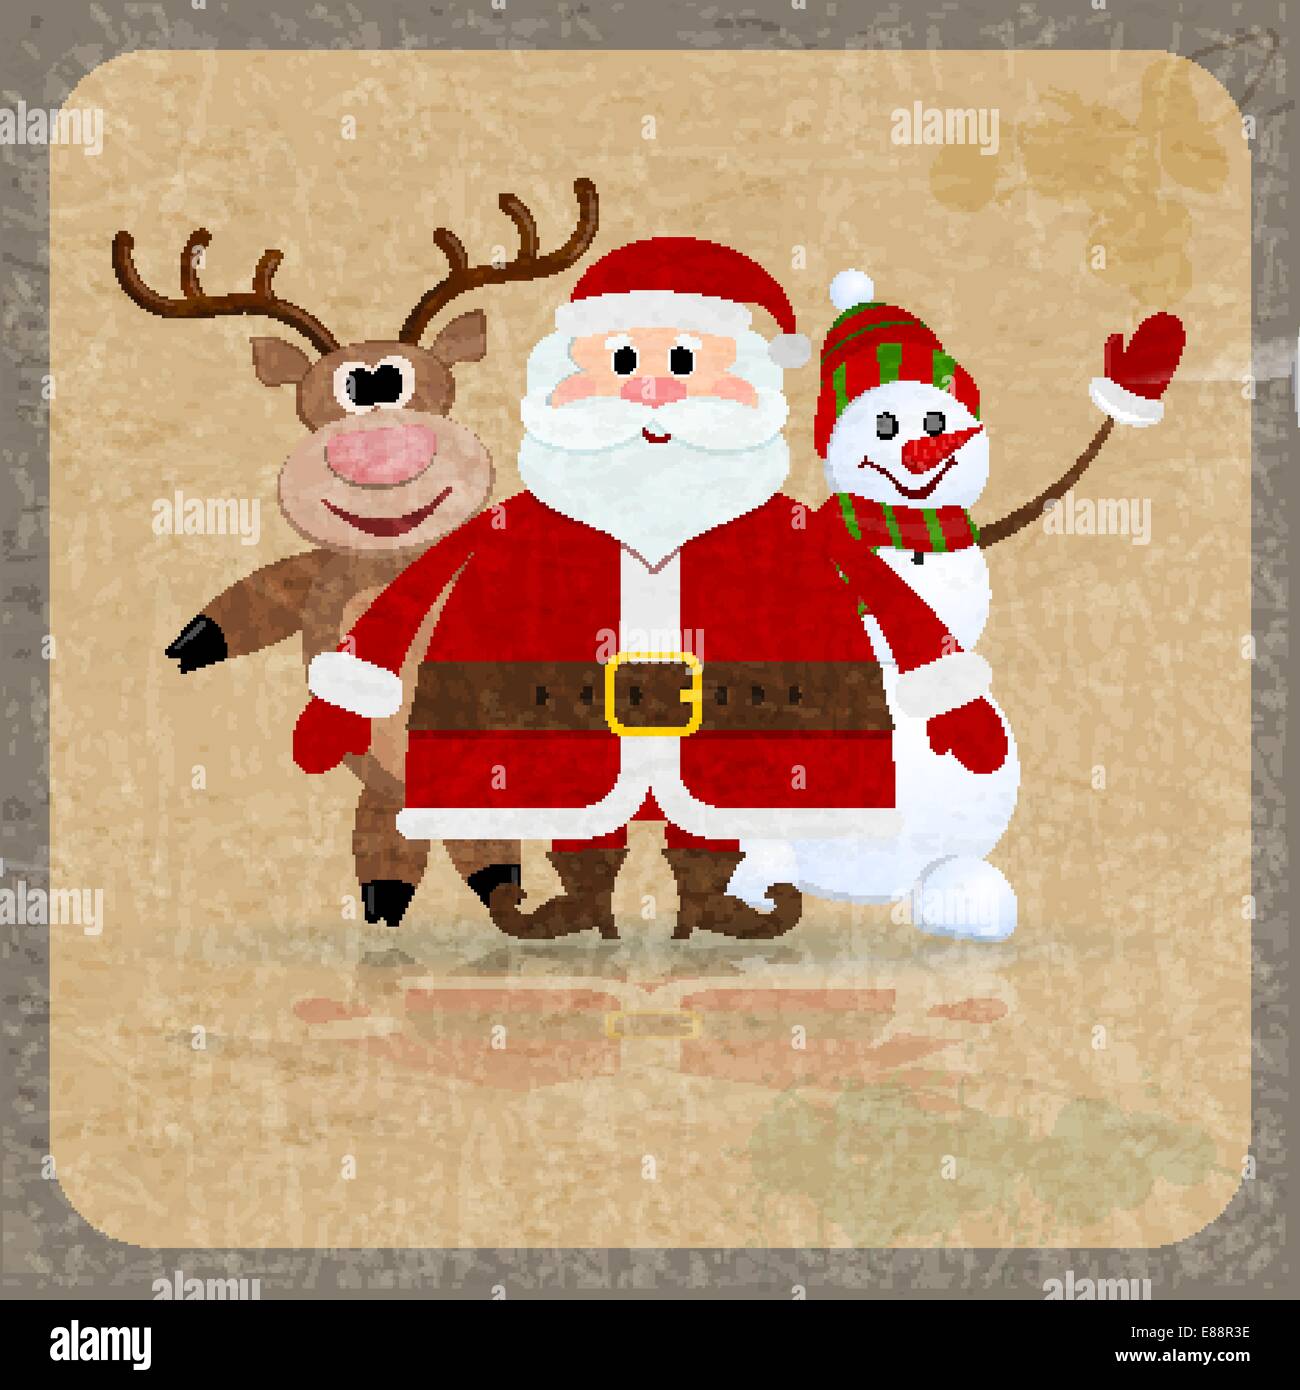 Santa Claus, snowman and reindeer on a retro background Stock Vector